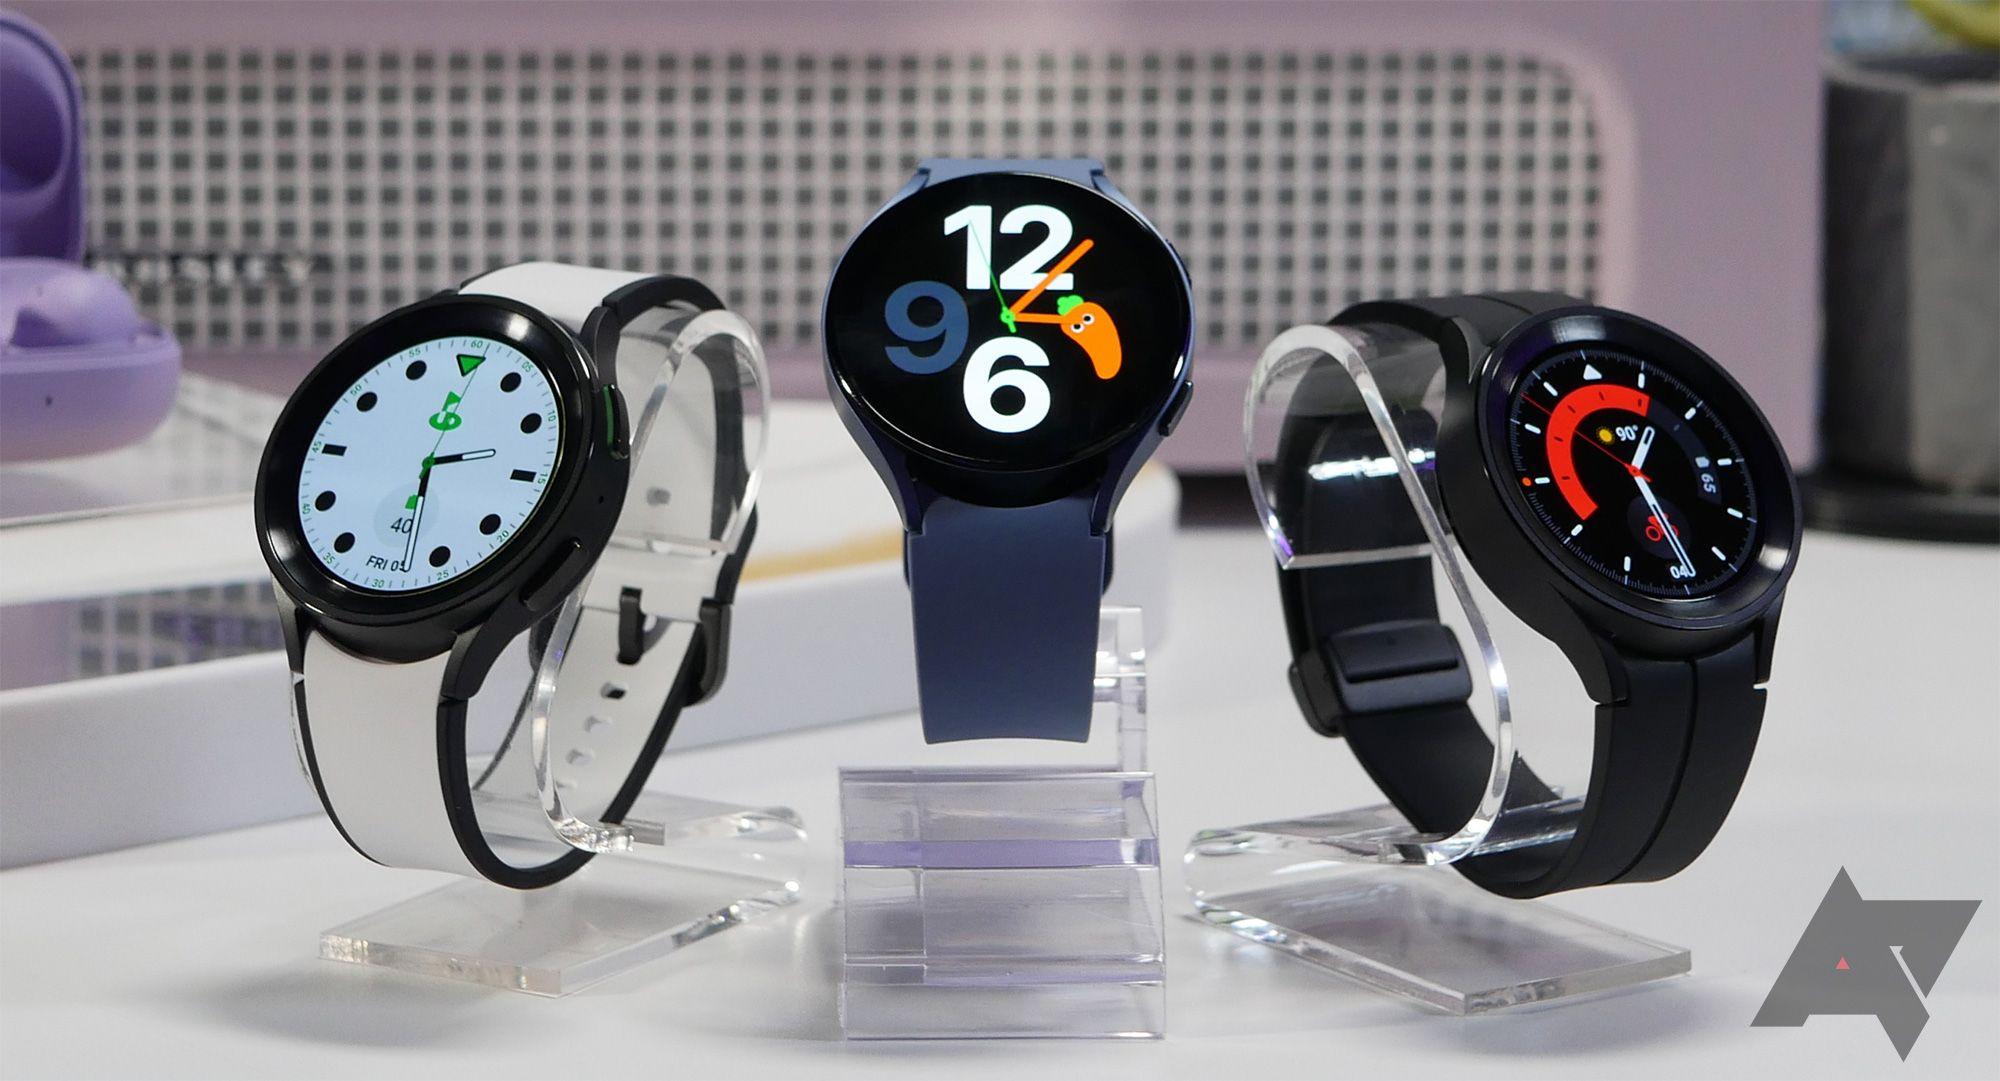 Samsung One UI 5 Watch will launch on this year’s